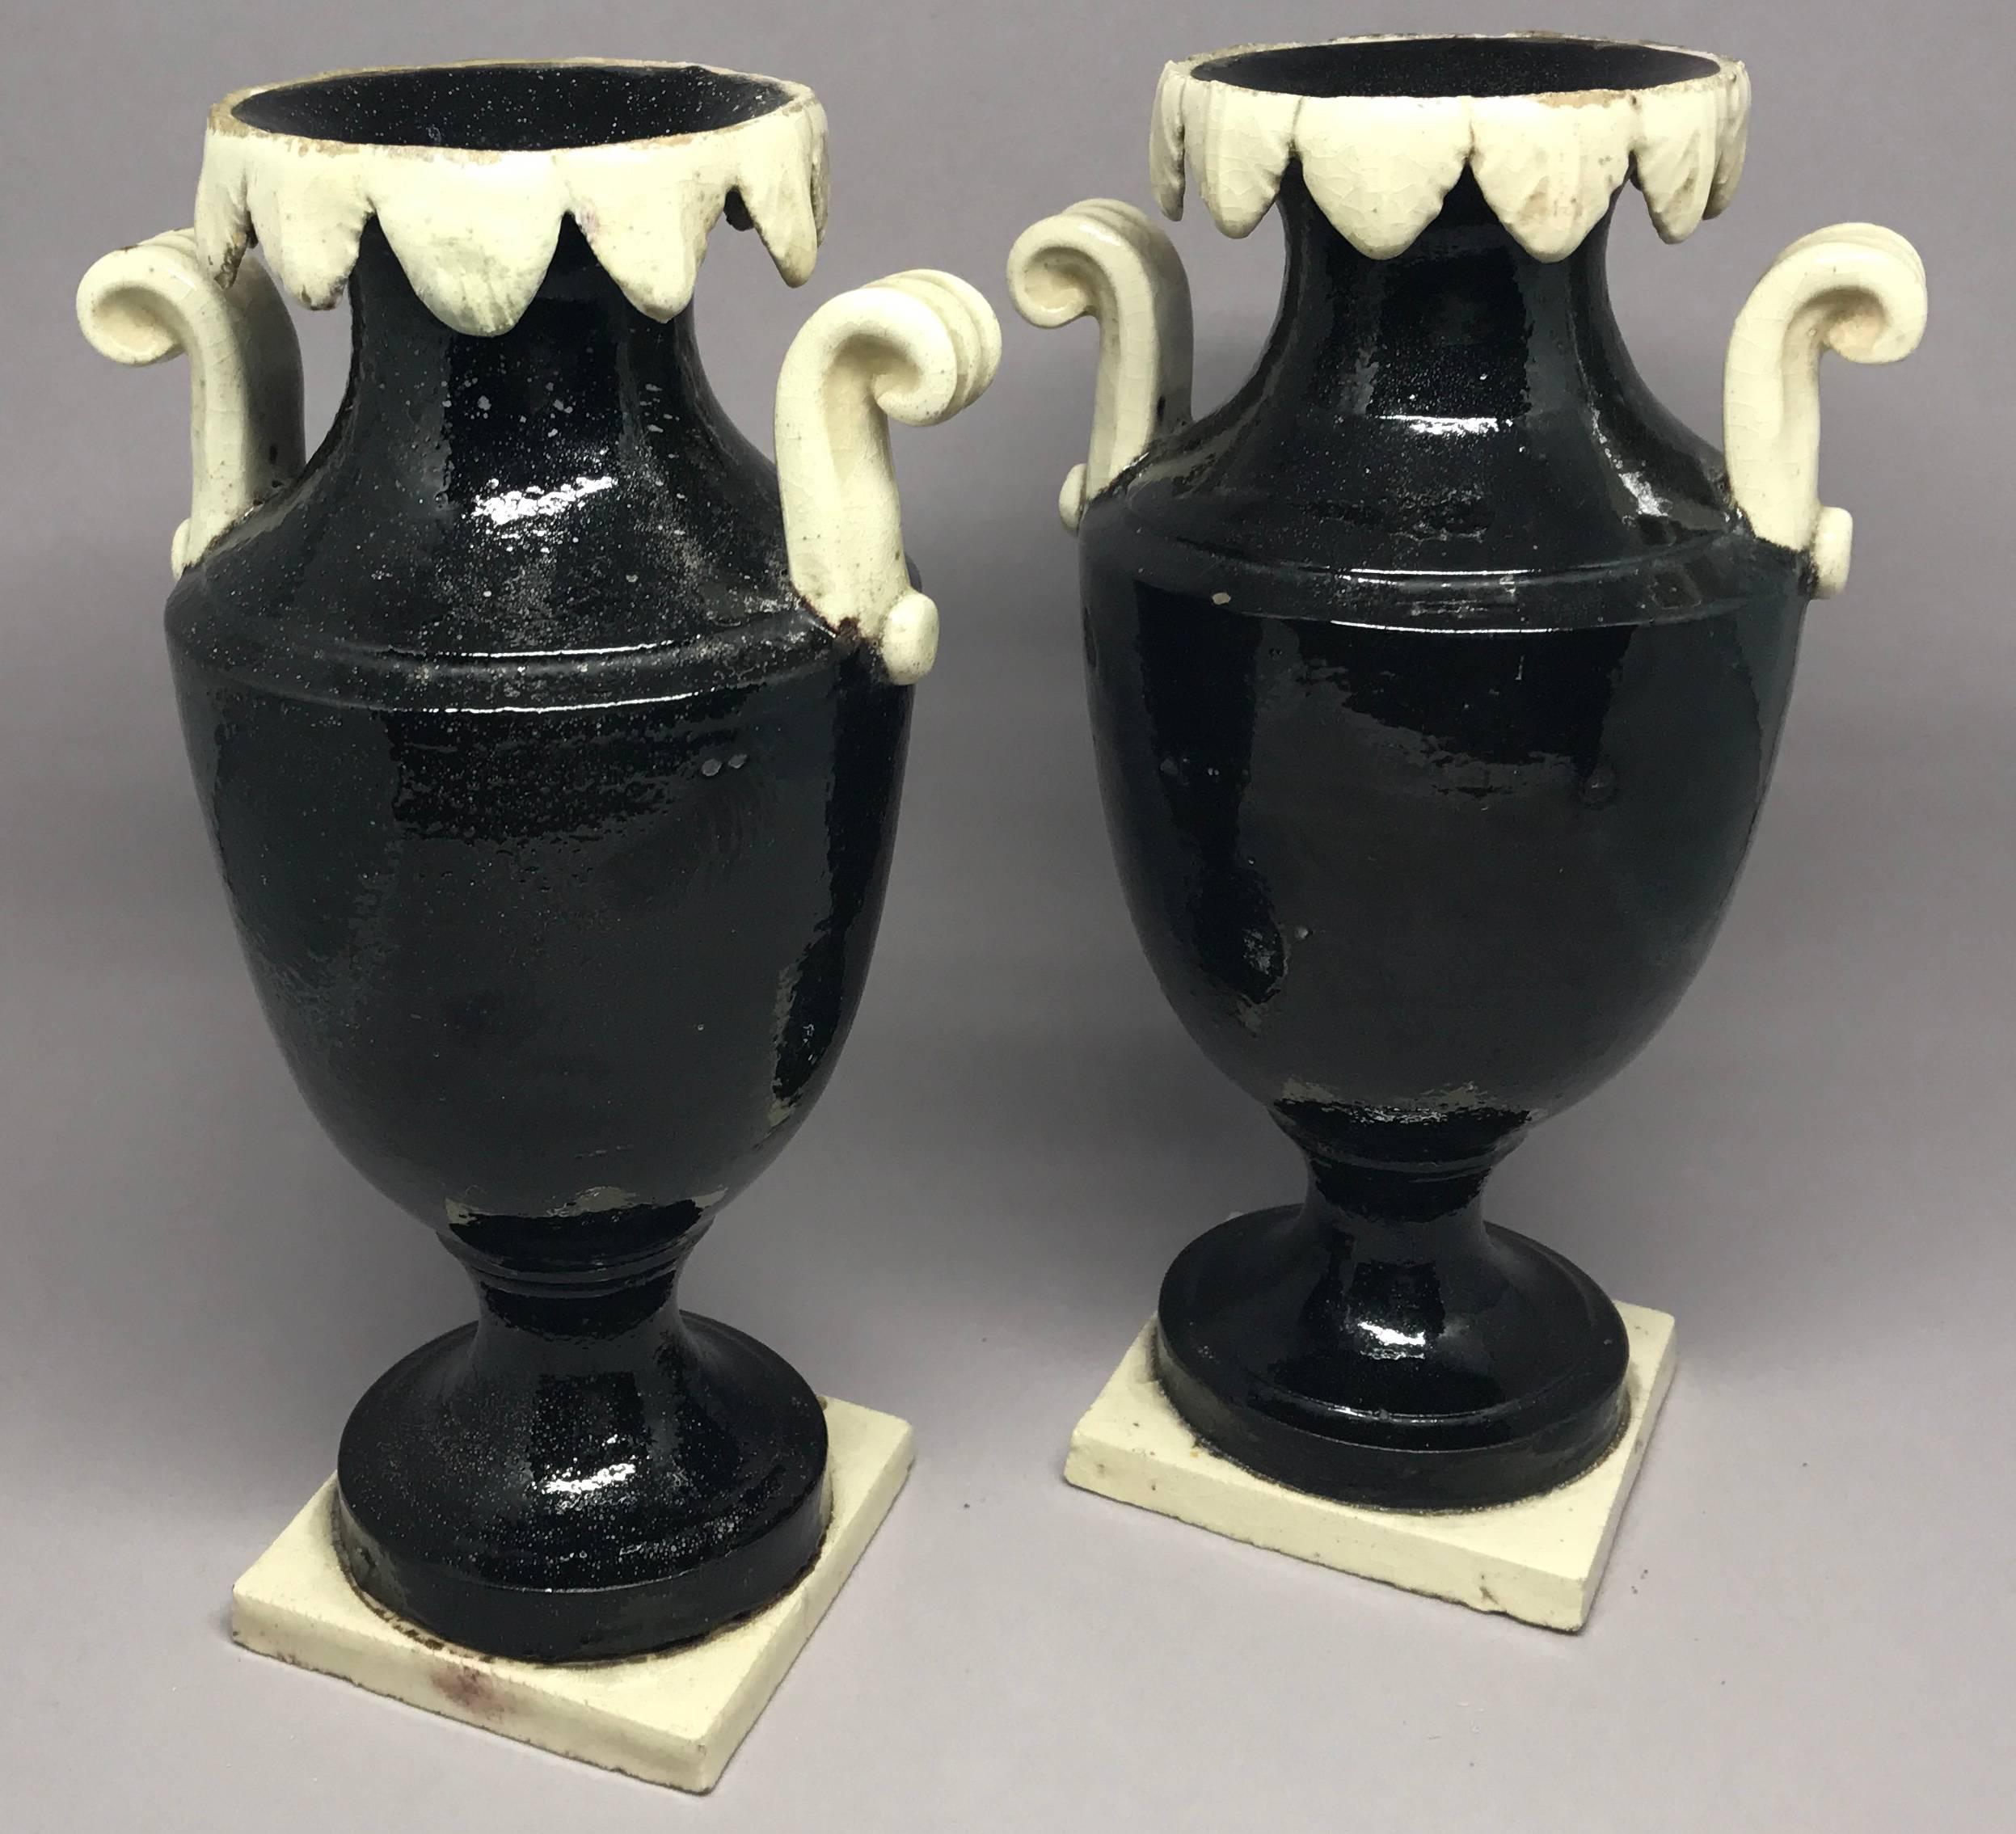 Pair of Neoclassical Black and White Giustiniani Urns For Sale 2